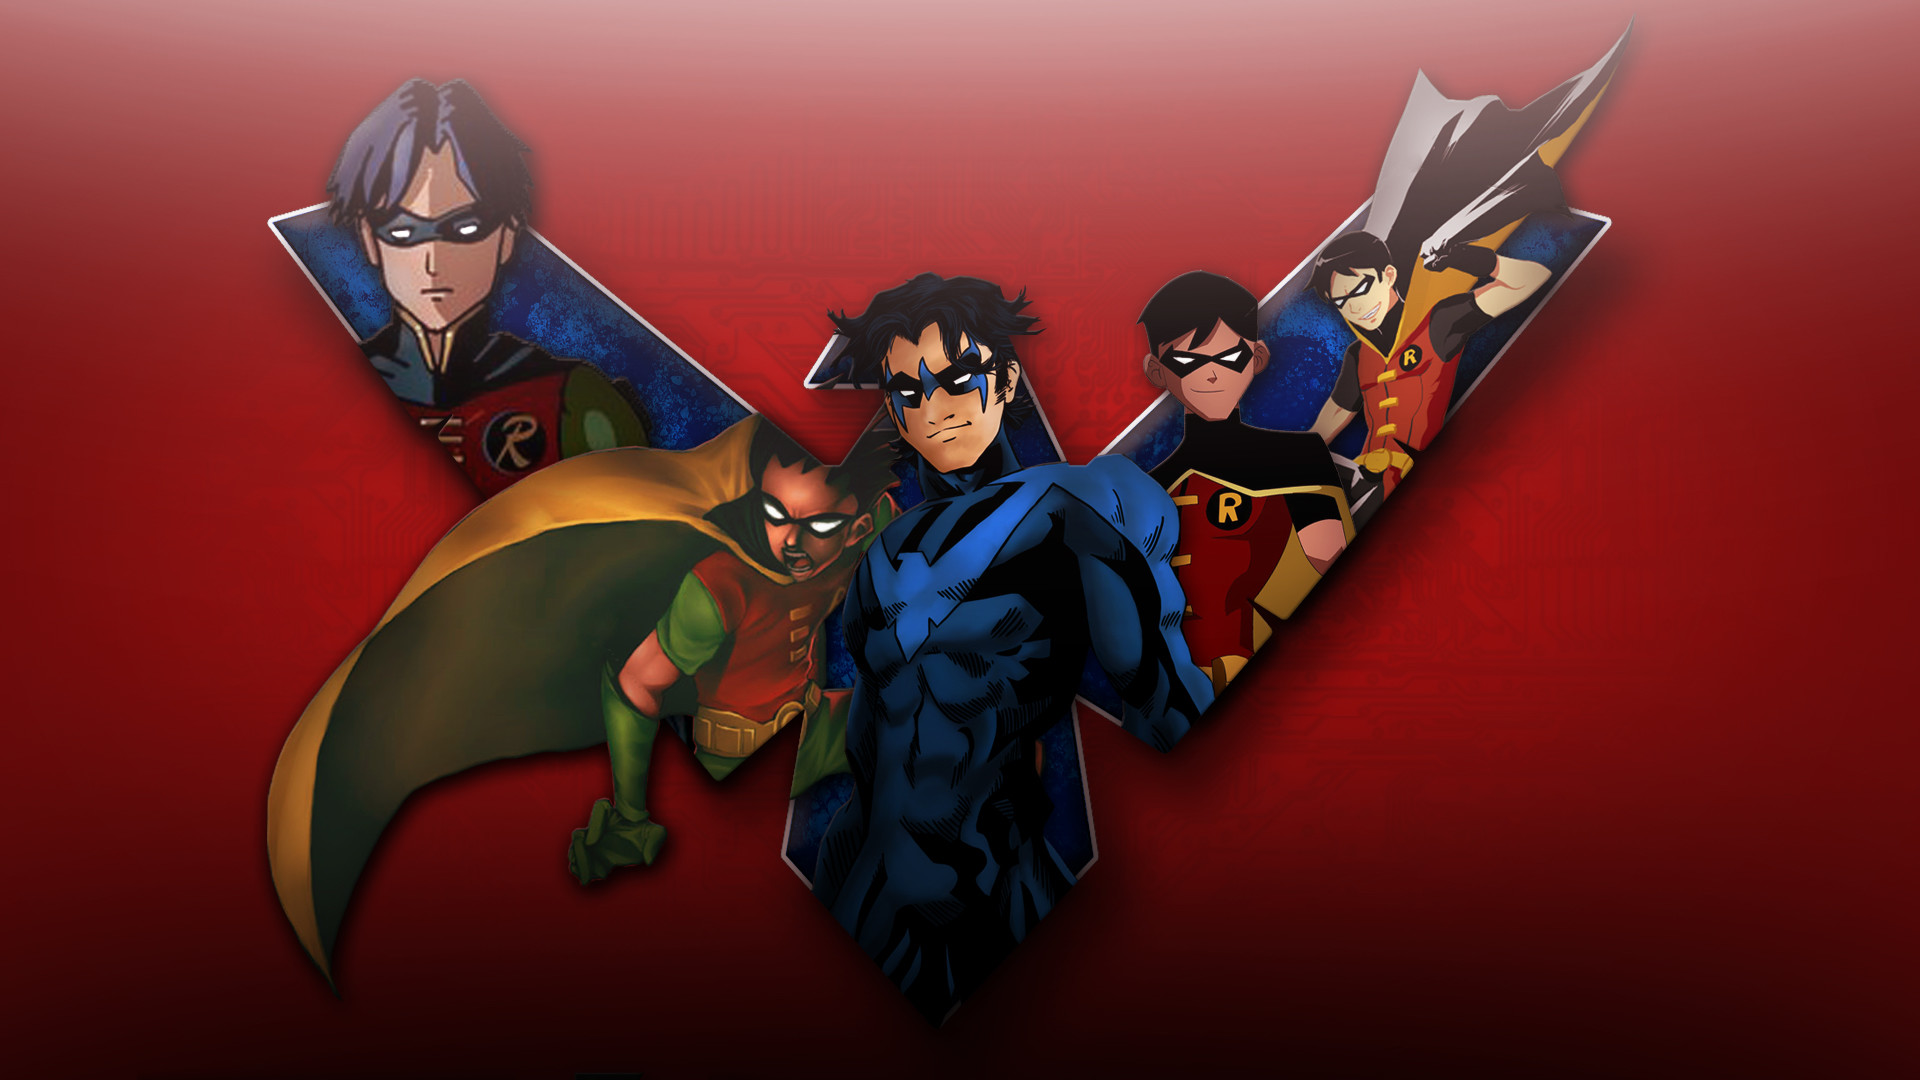 1920x1080 Young Justice Robin Dick Grayson Wallpaper by FeitanPainPacker on ... |  Download Wallpaper | Pinterest | Young justice and Wallpaper